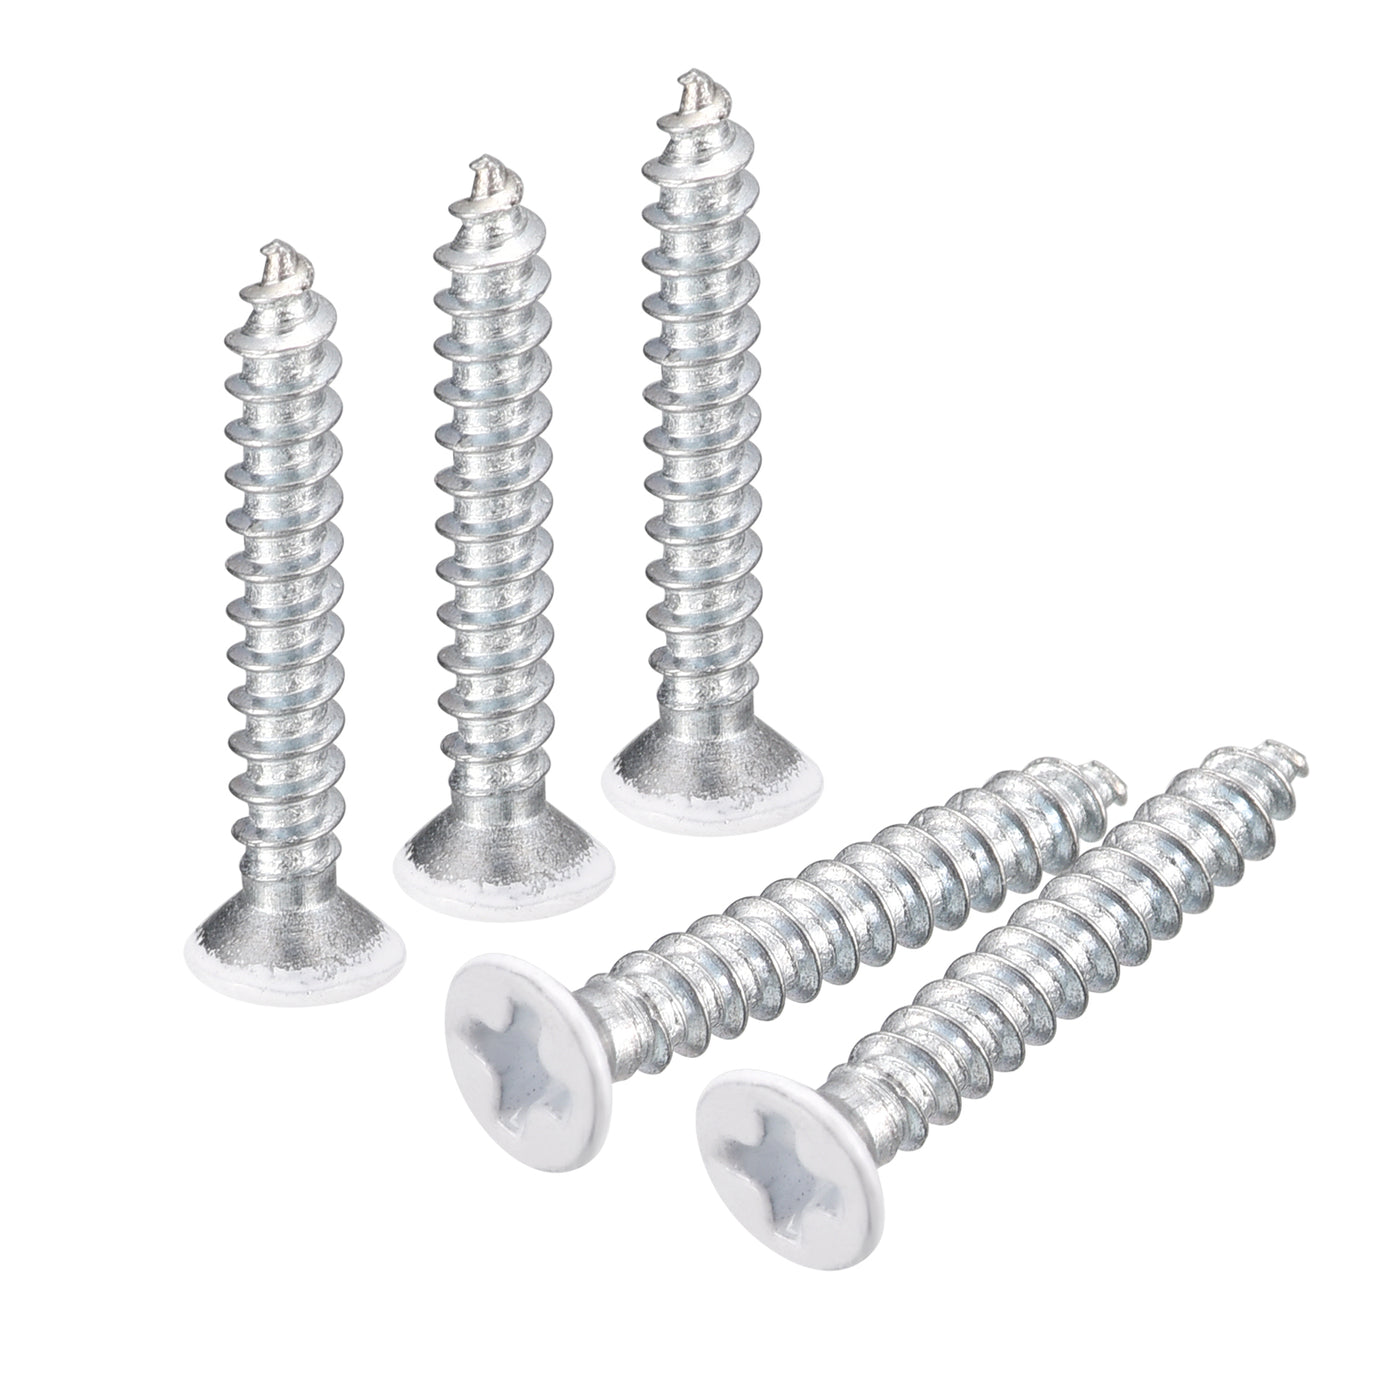 uxcell Uxcell ST3x20mm White Self Tapping Screws, 100pcs Flat Head Phillips Wood Screws